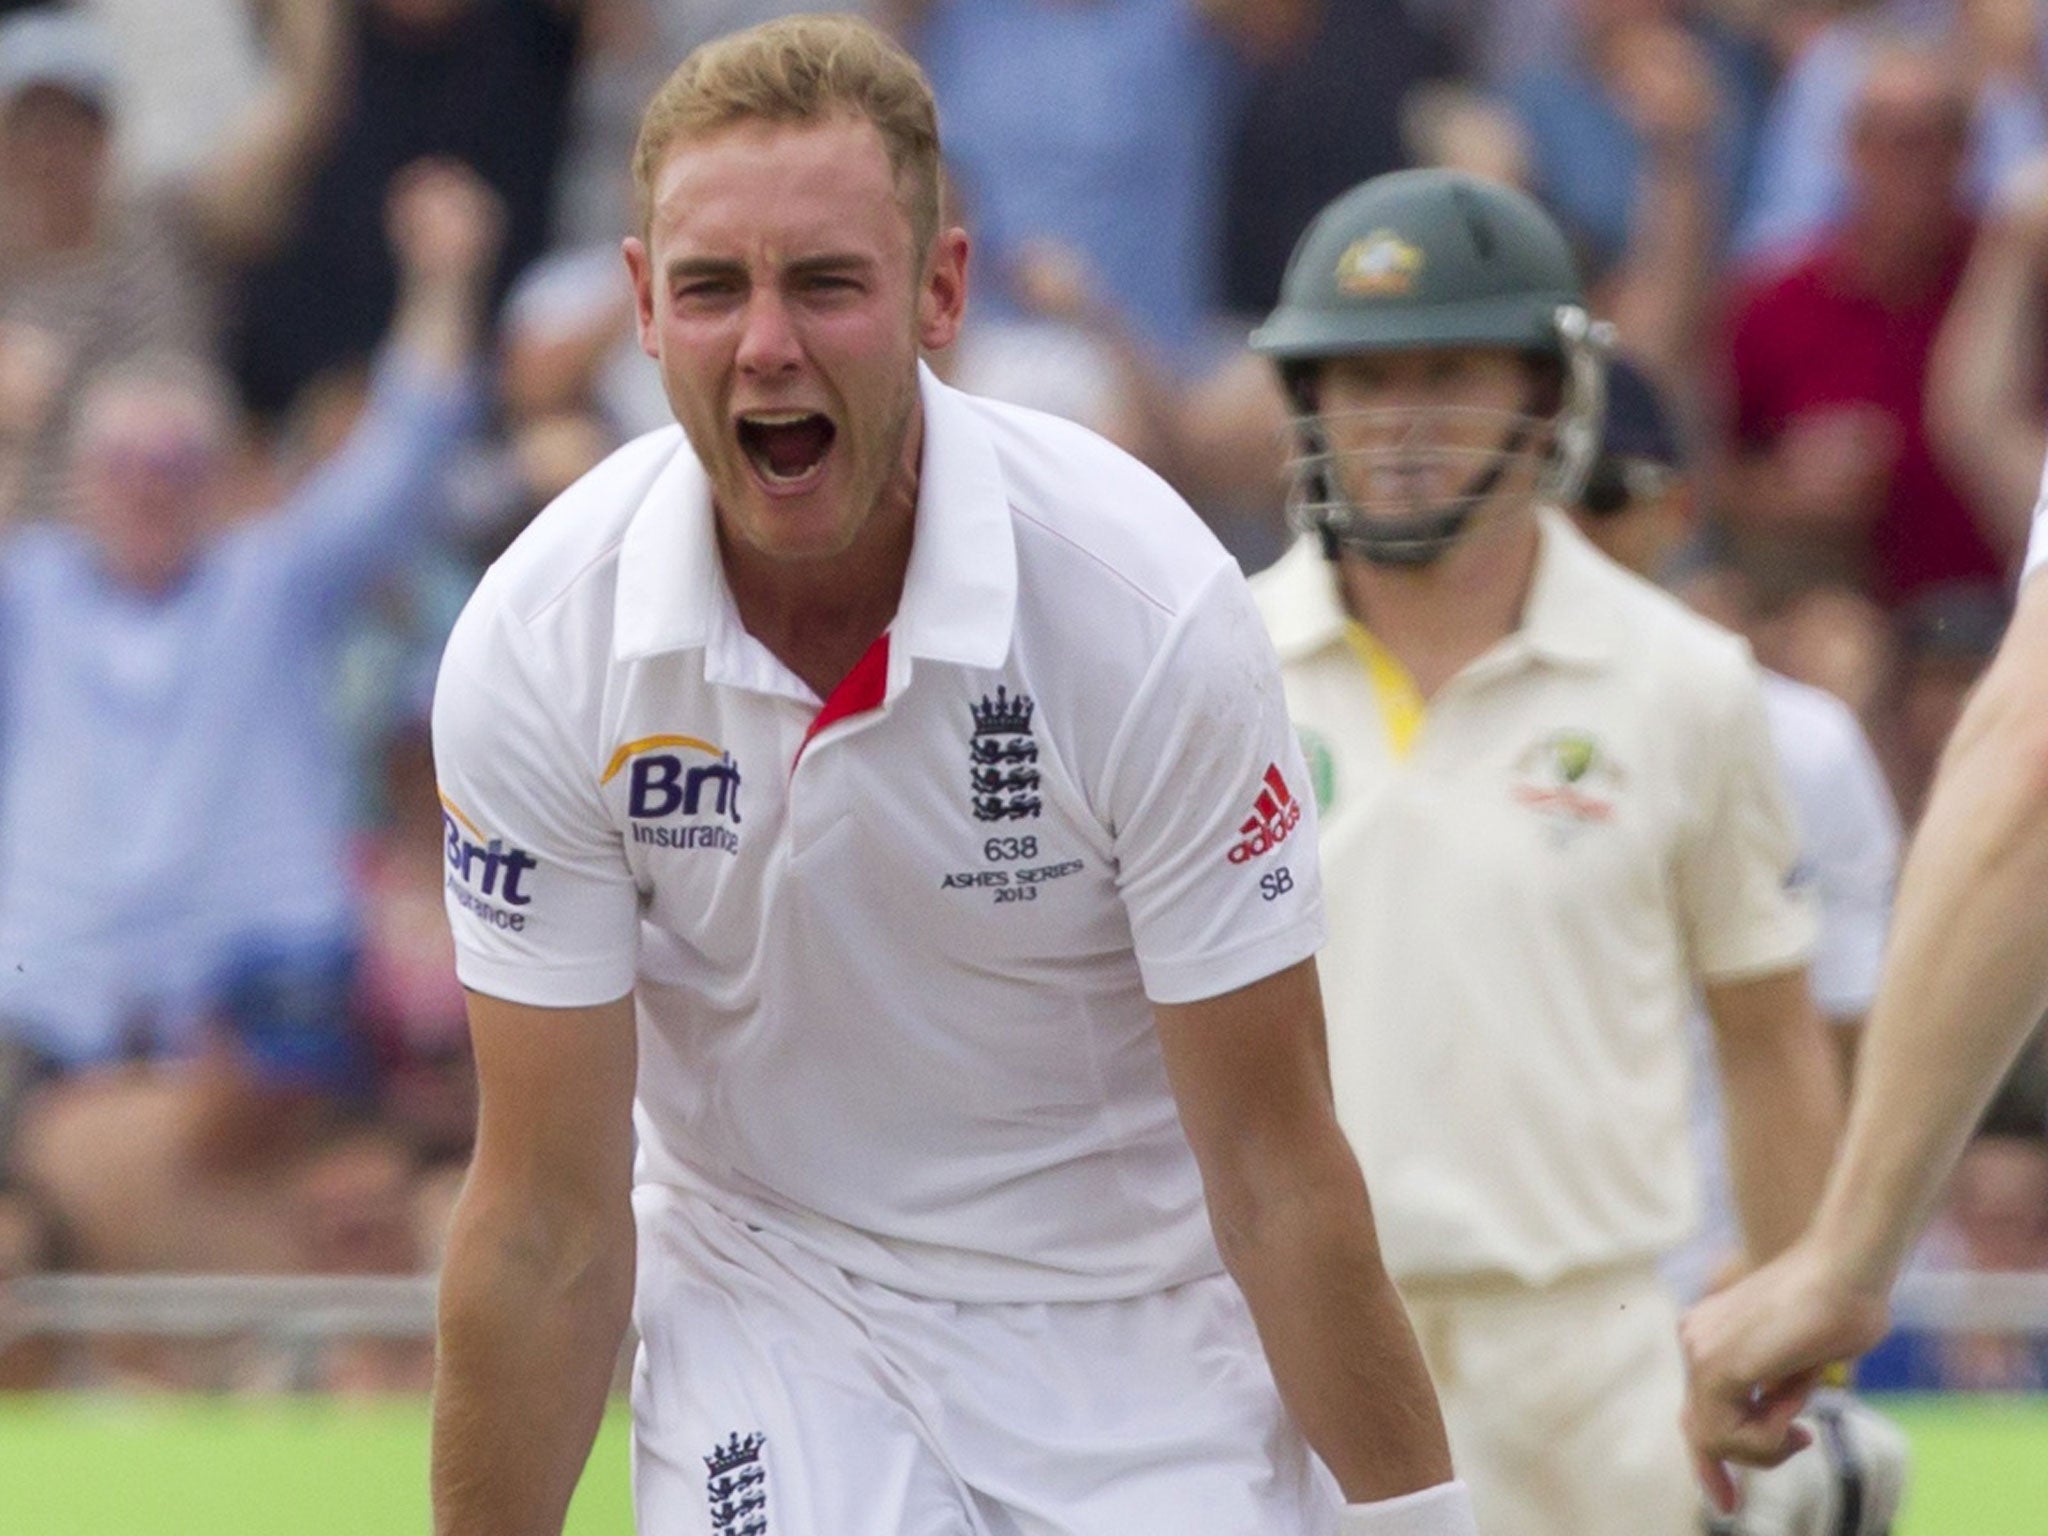 Stuart Broad celebrates as only he knows how after taking Waton’s wicket